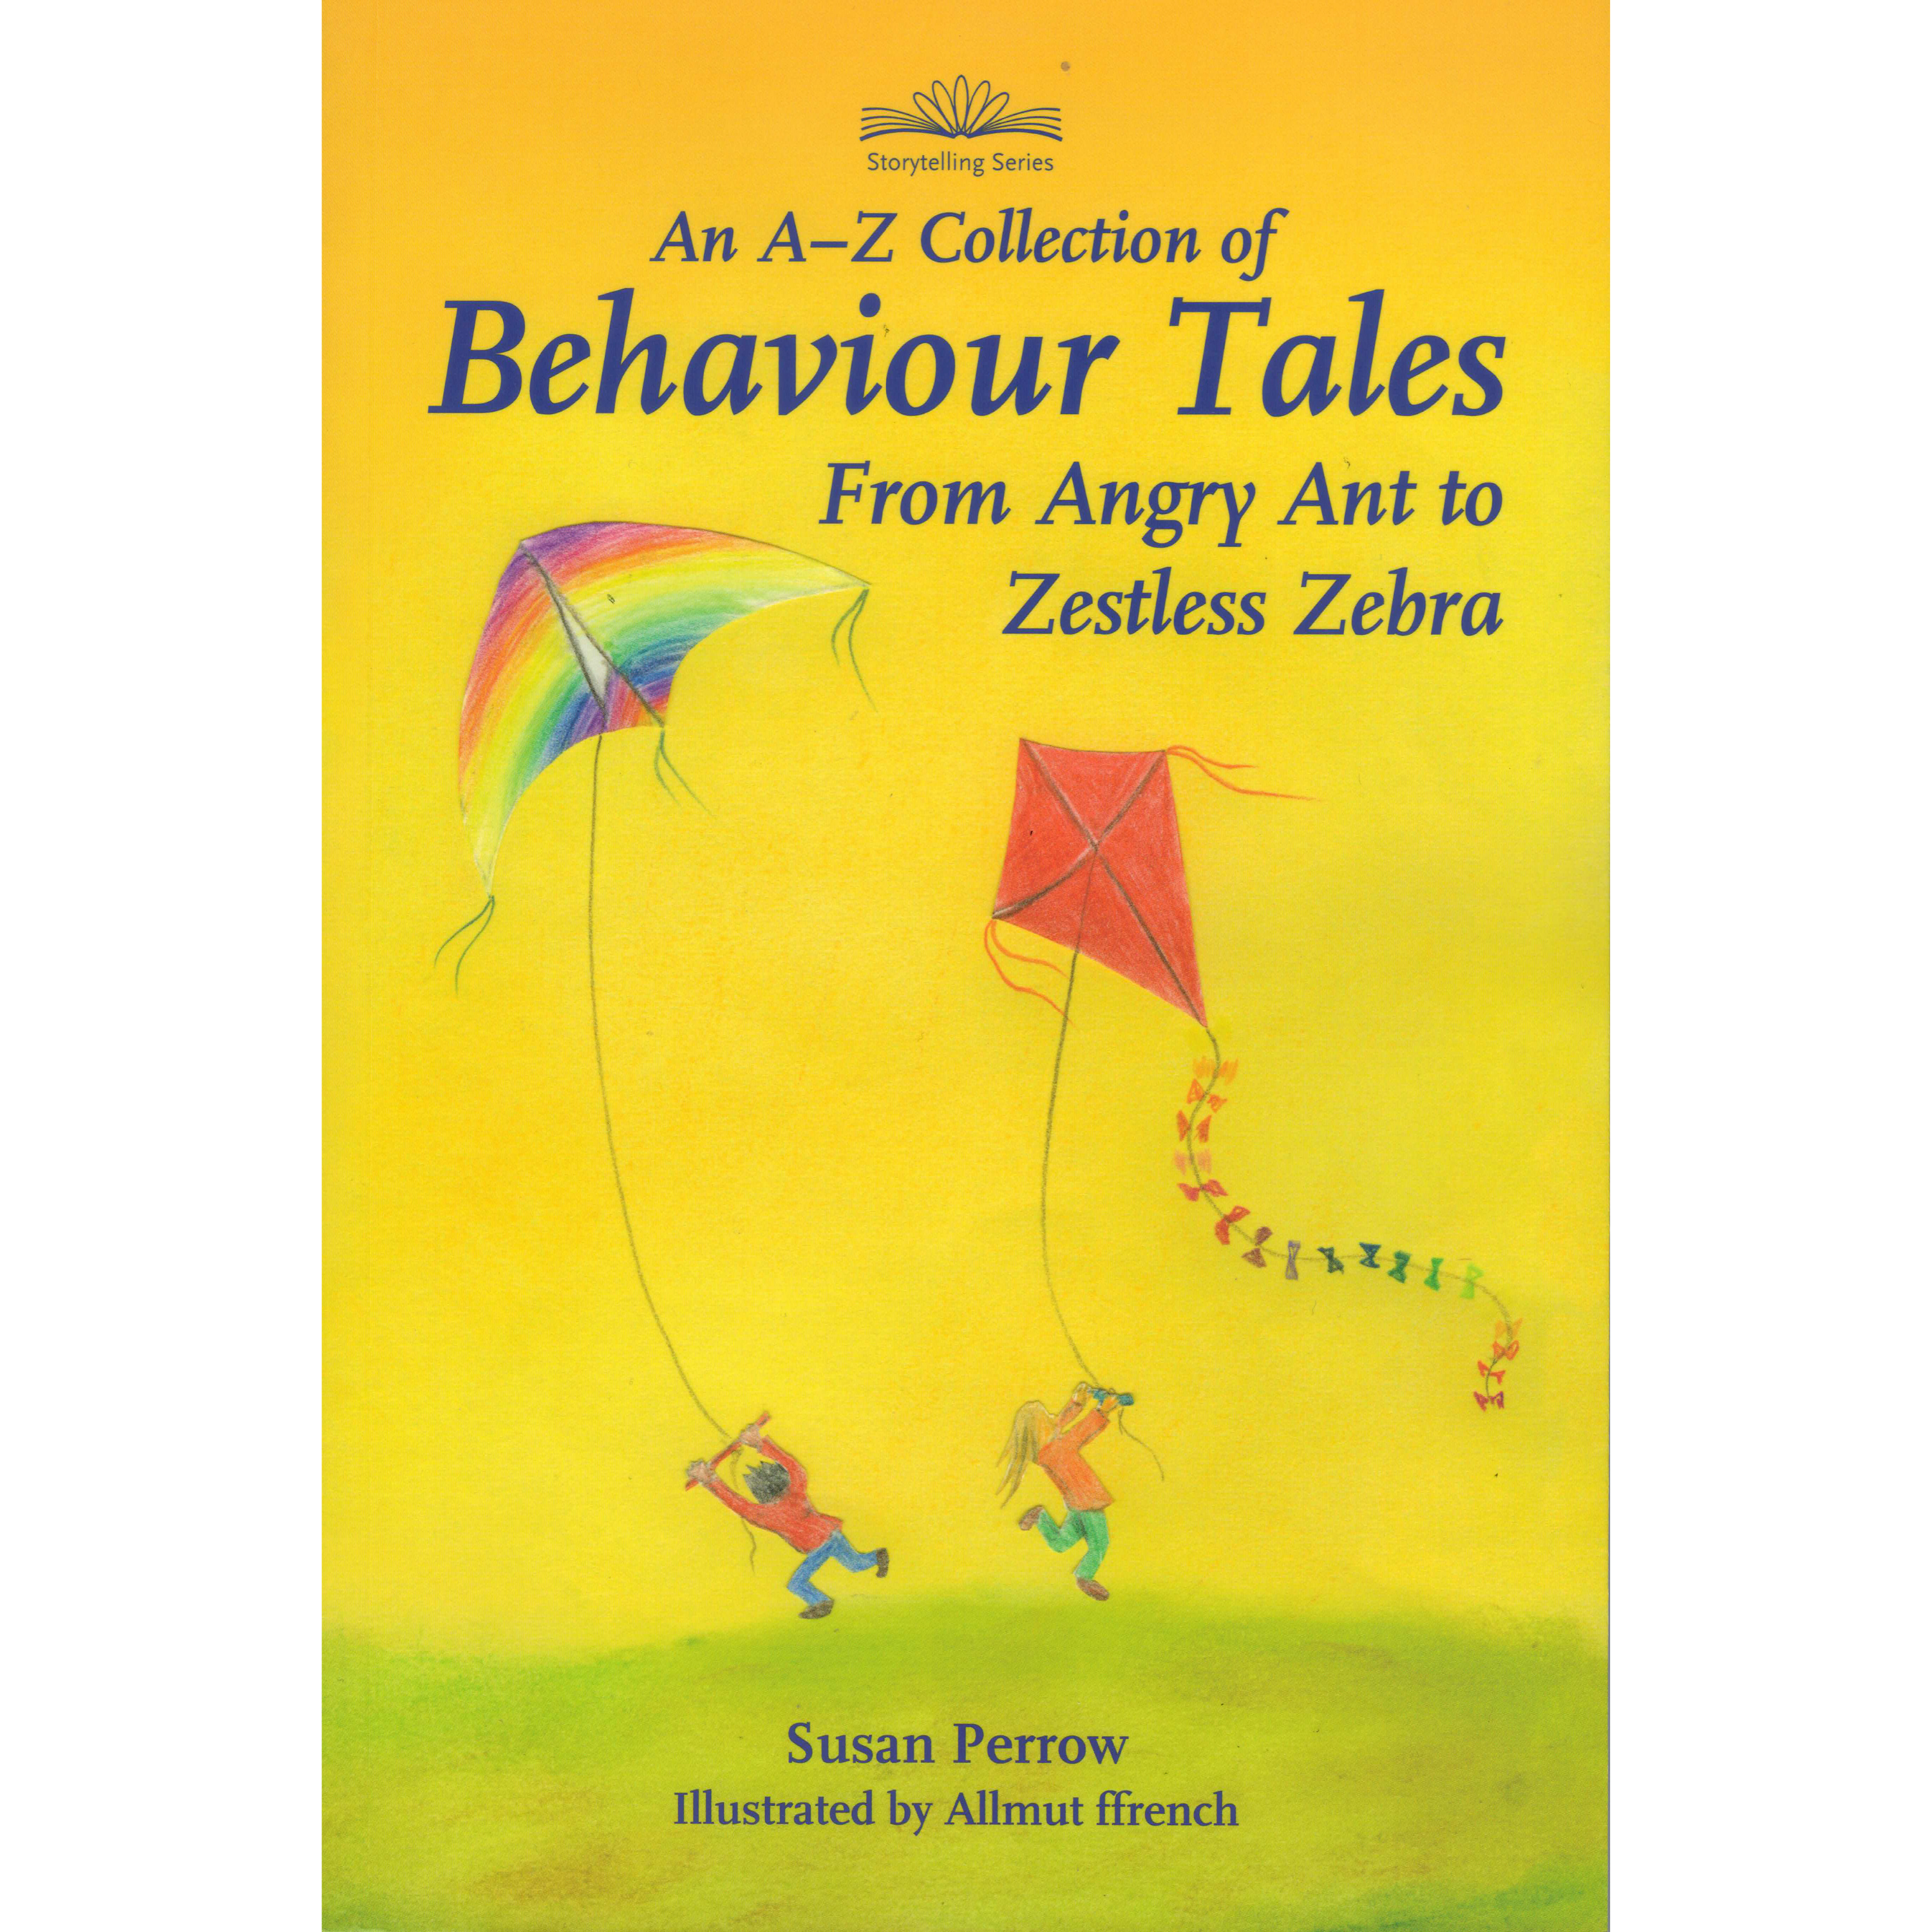 An A-Z Collection of Behaviour Tales by Susan Perrow